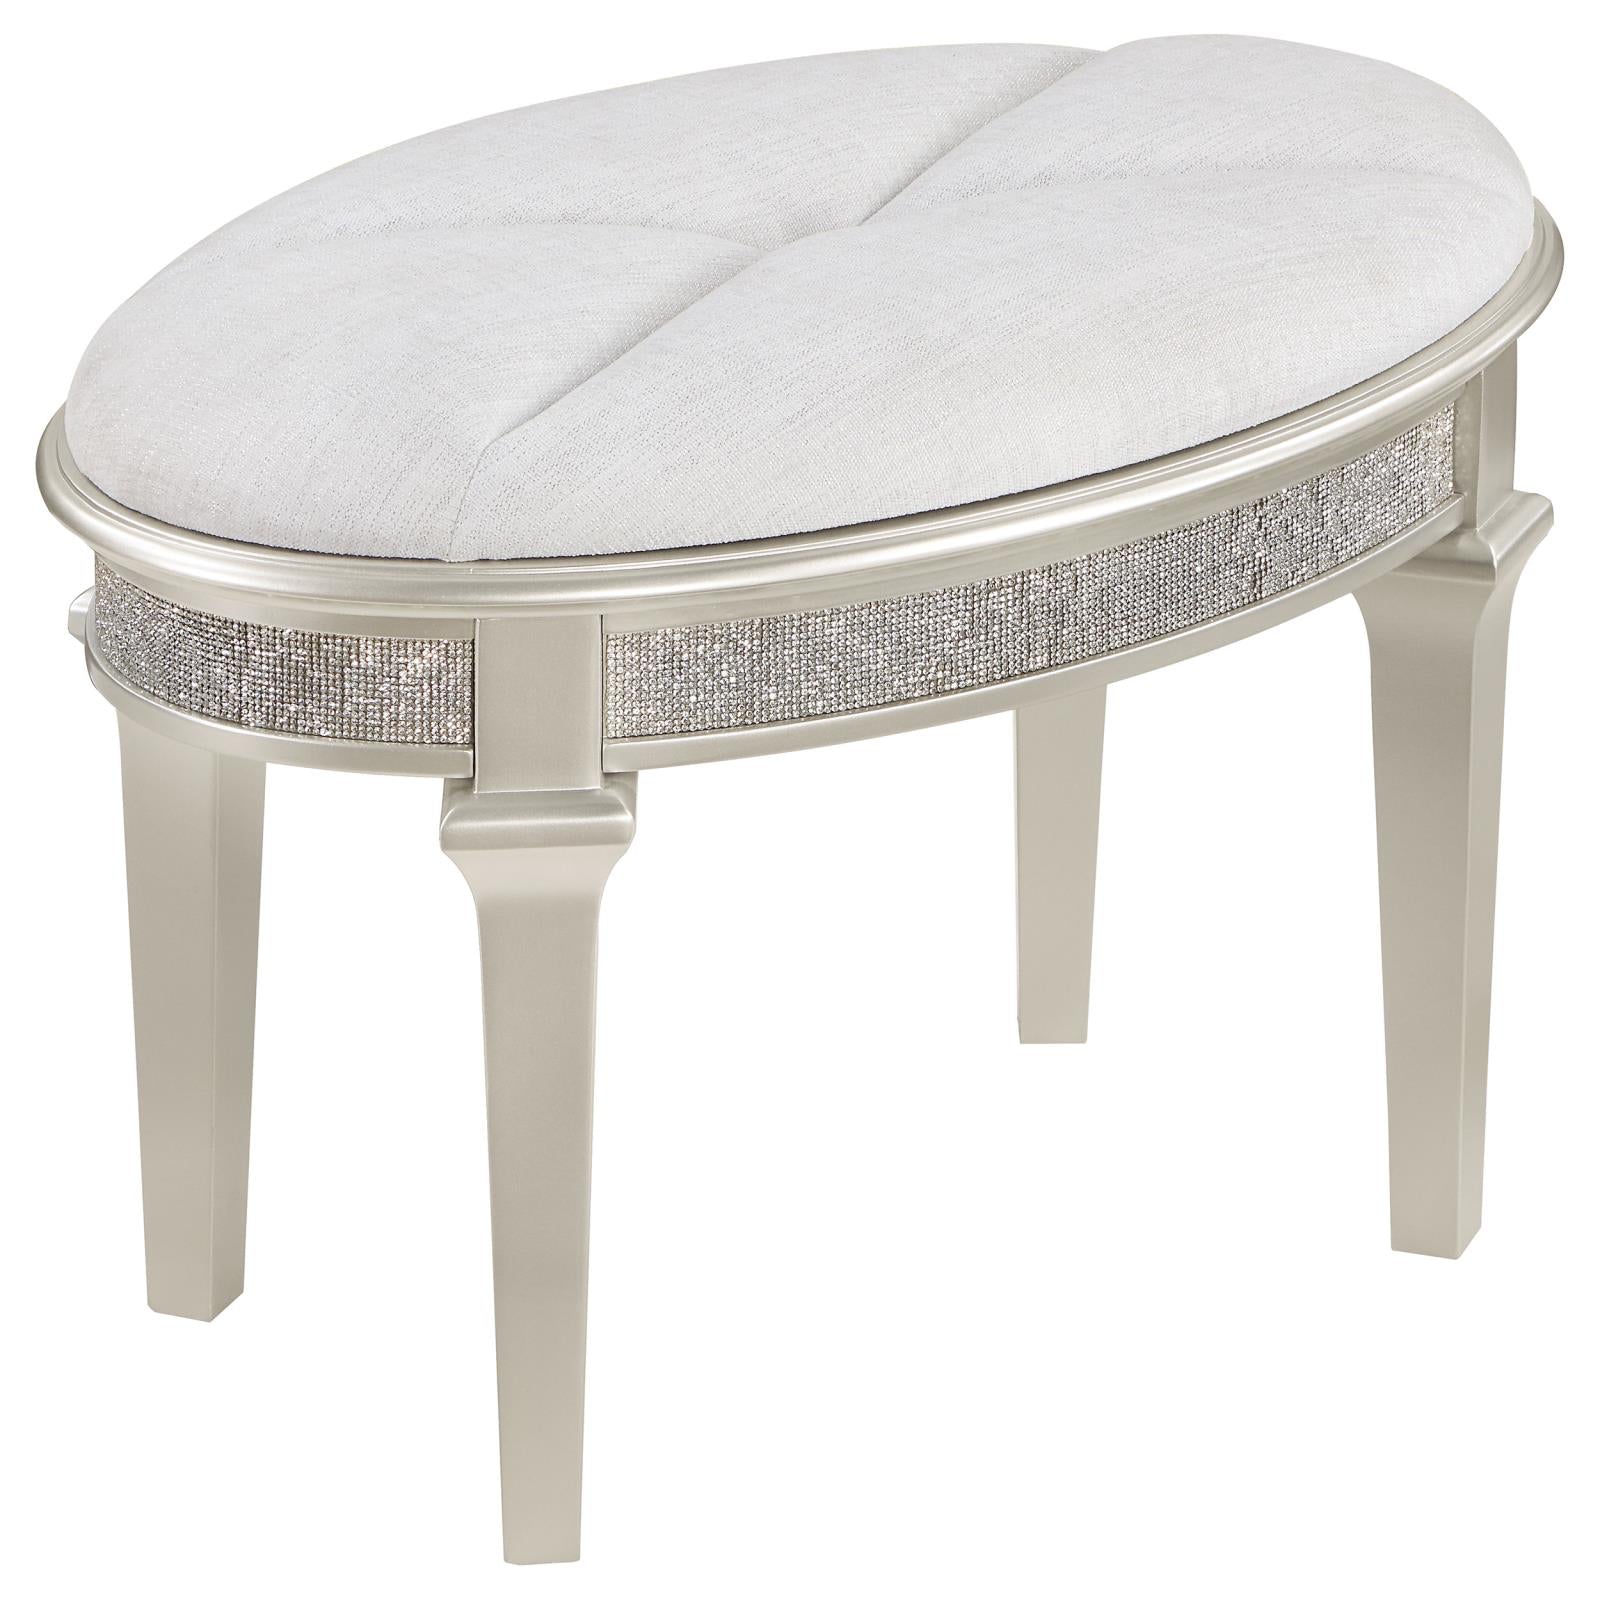 Evangeline Evangeline Oval Vanity Stool With Faux Diamond Trim Silver And Ivory 223399